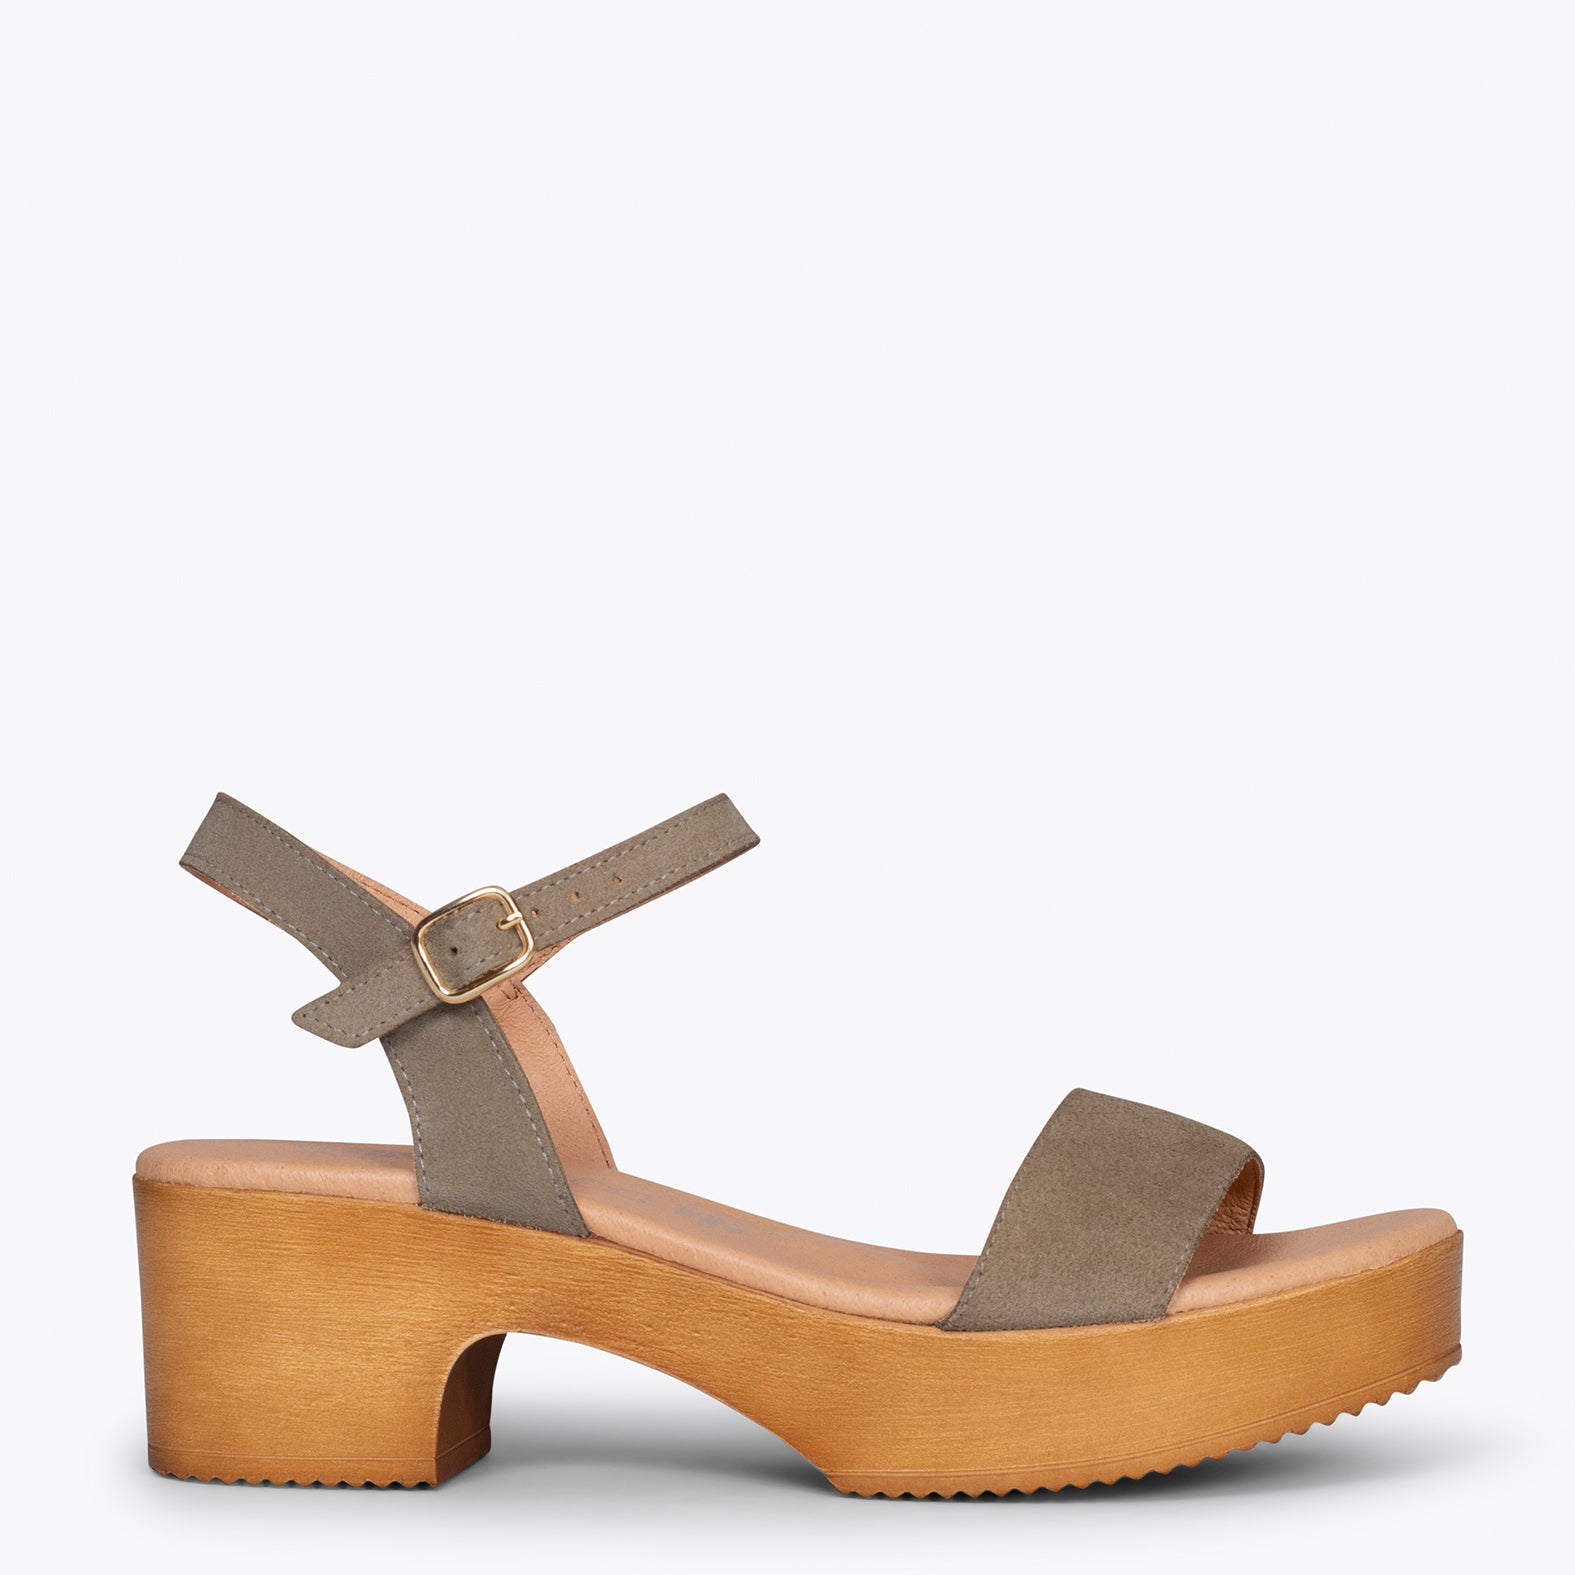 CALA – TAUPE sandals with platform